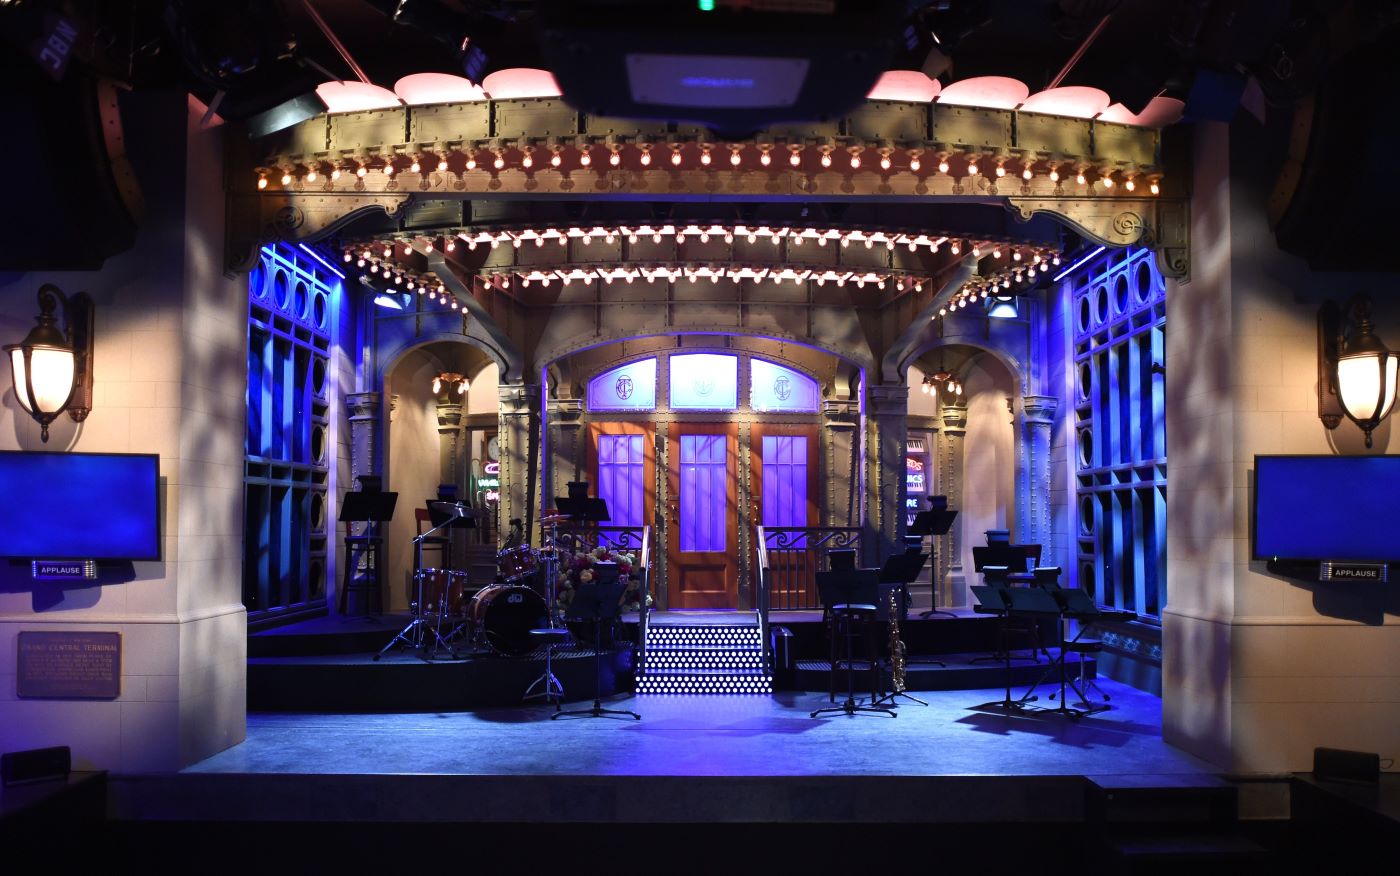 The classic SNL stage with all the lights, stairs, the blue glow, instruments, and the big wooden doors in the back.